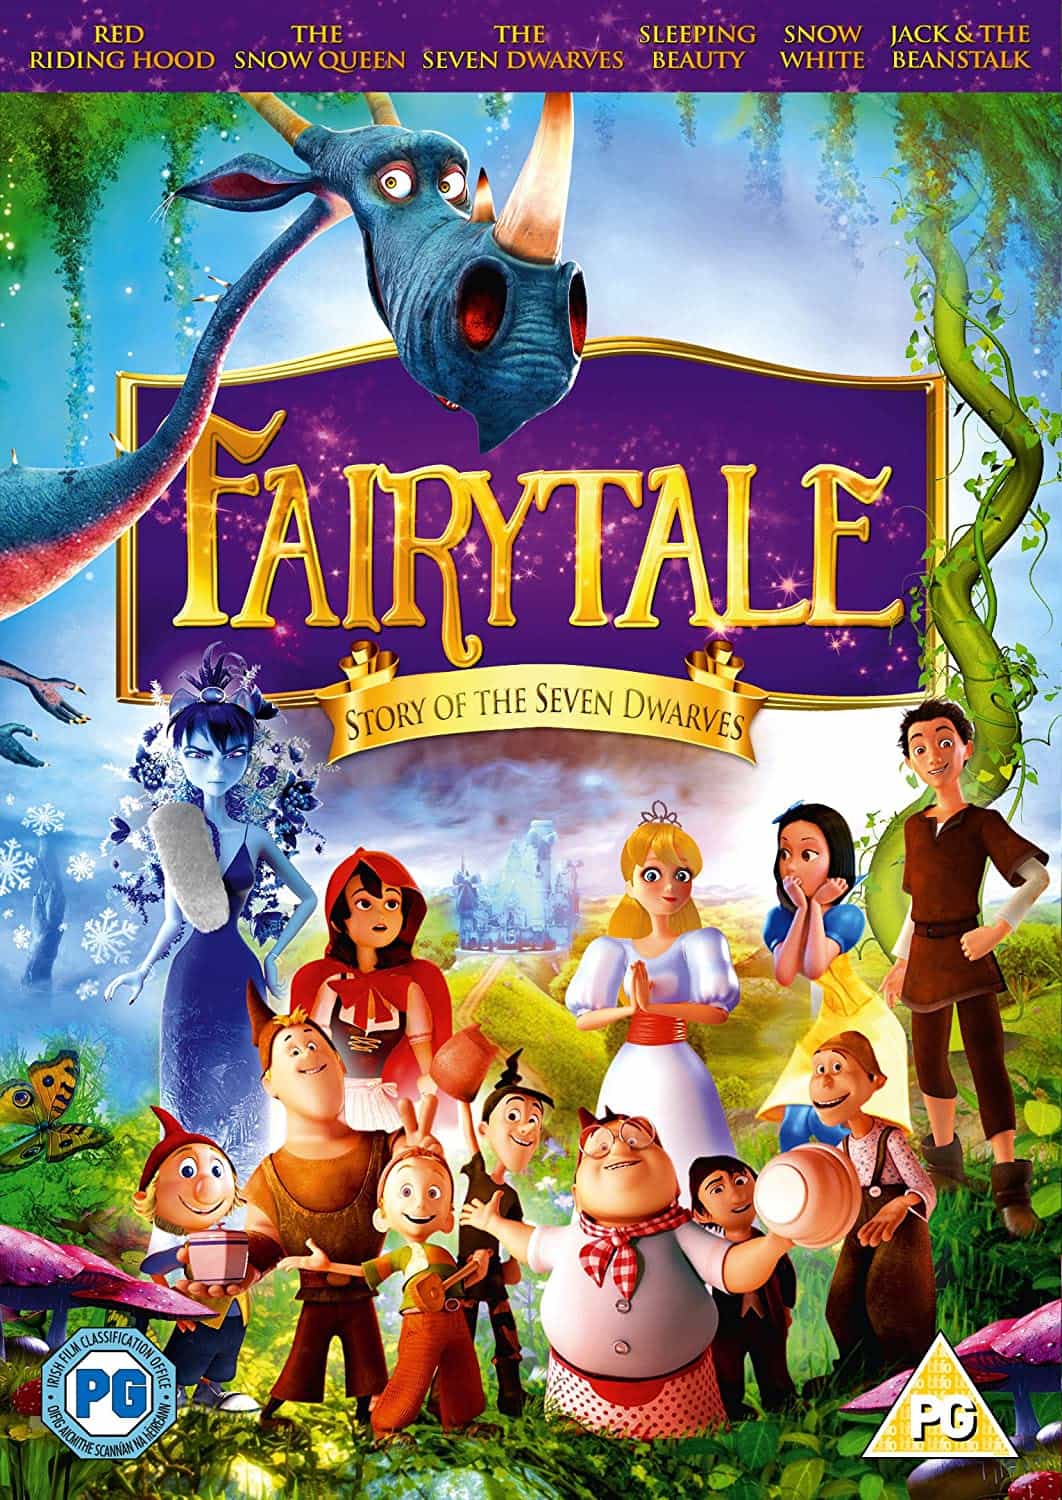 Fairytale: Story of the Seven Dwarves